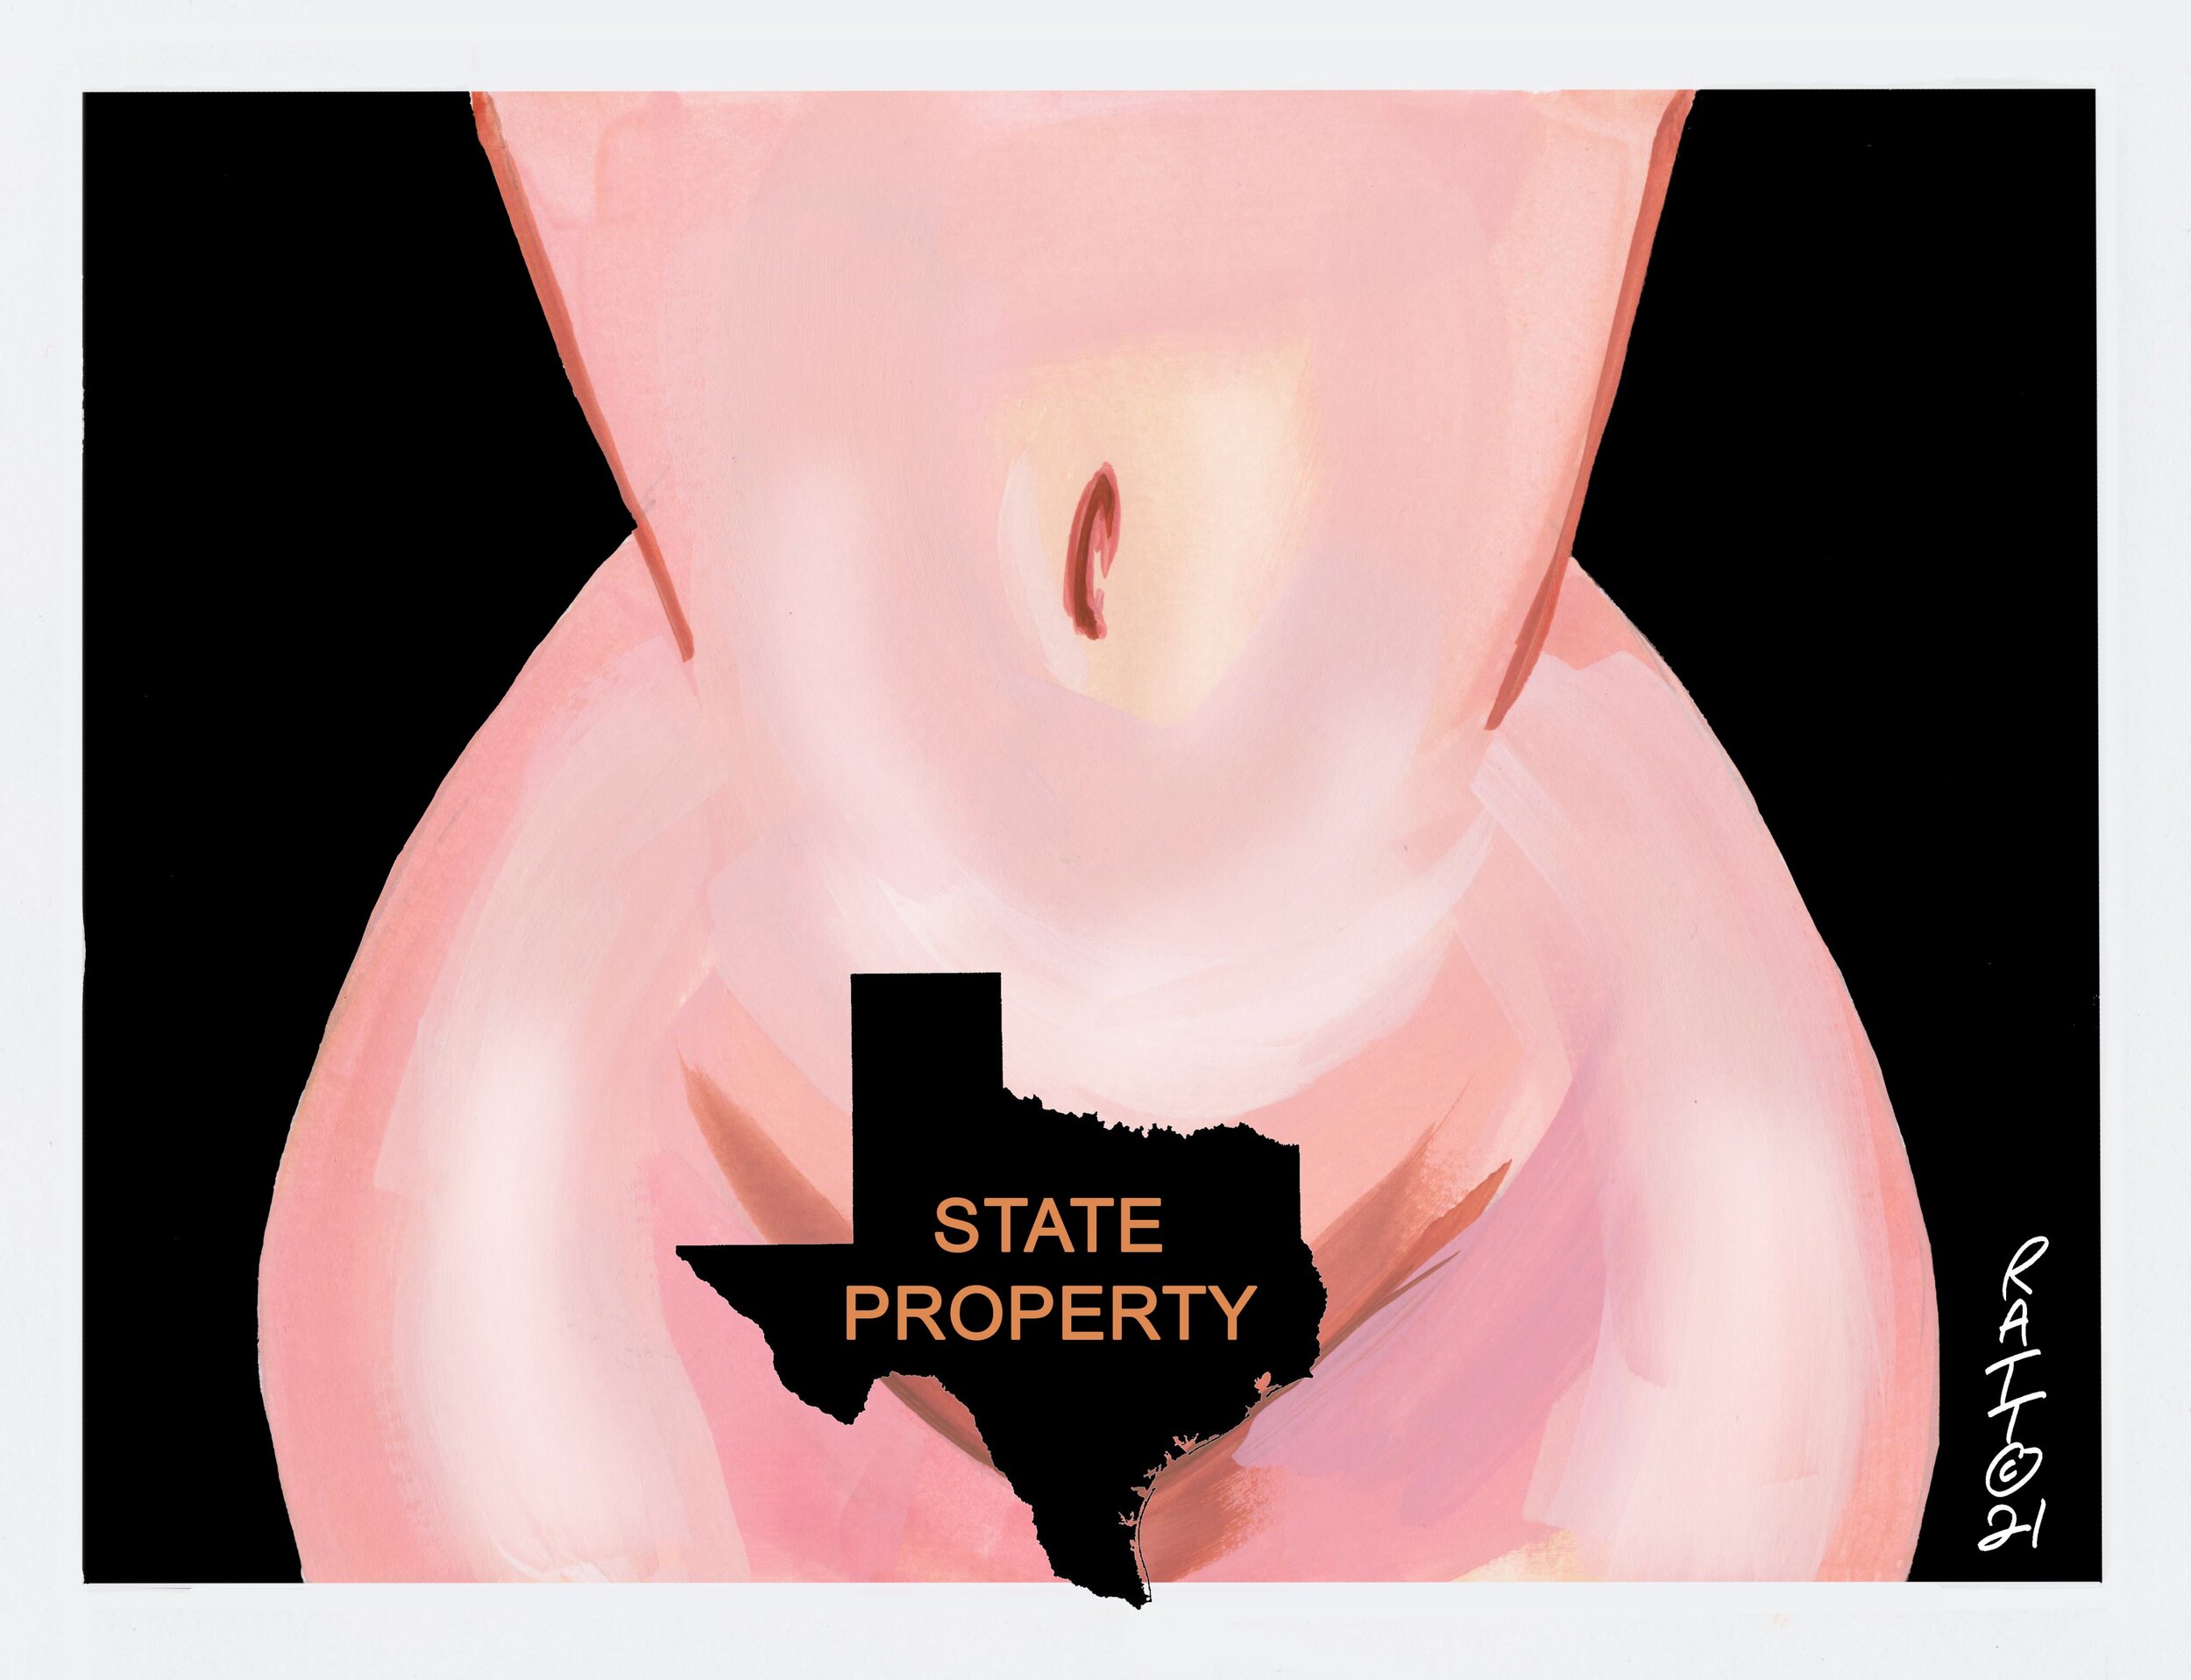 Texas state property.  (Crooks And Liars, Sept. 4, 2021.)